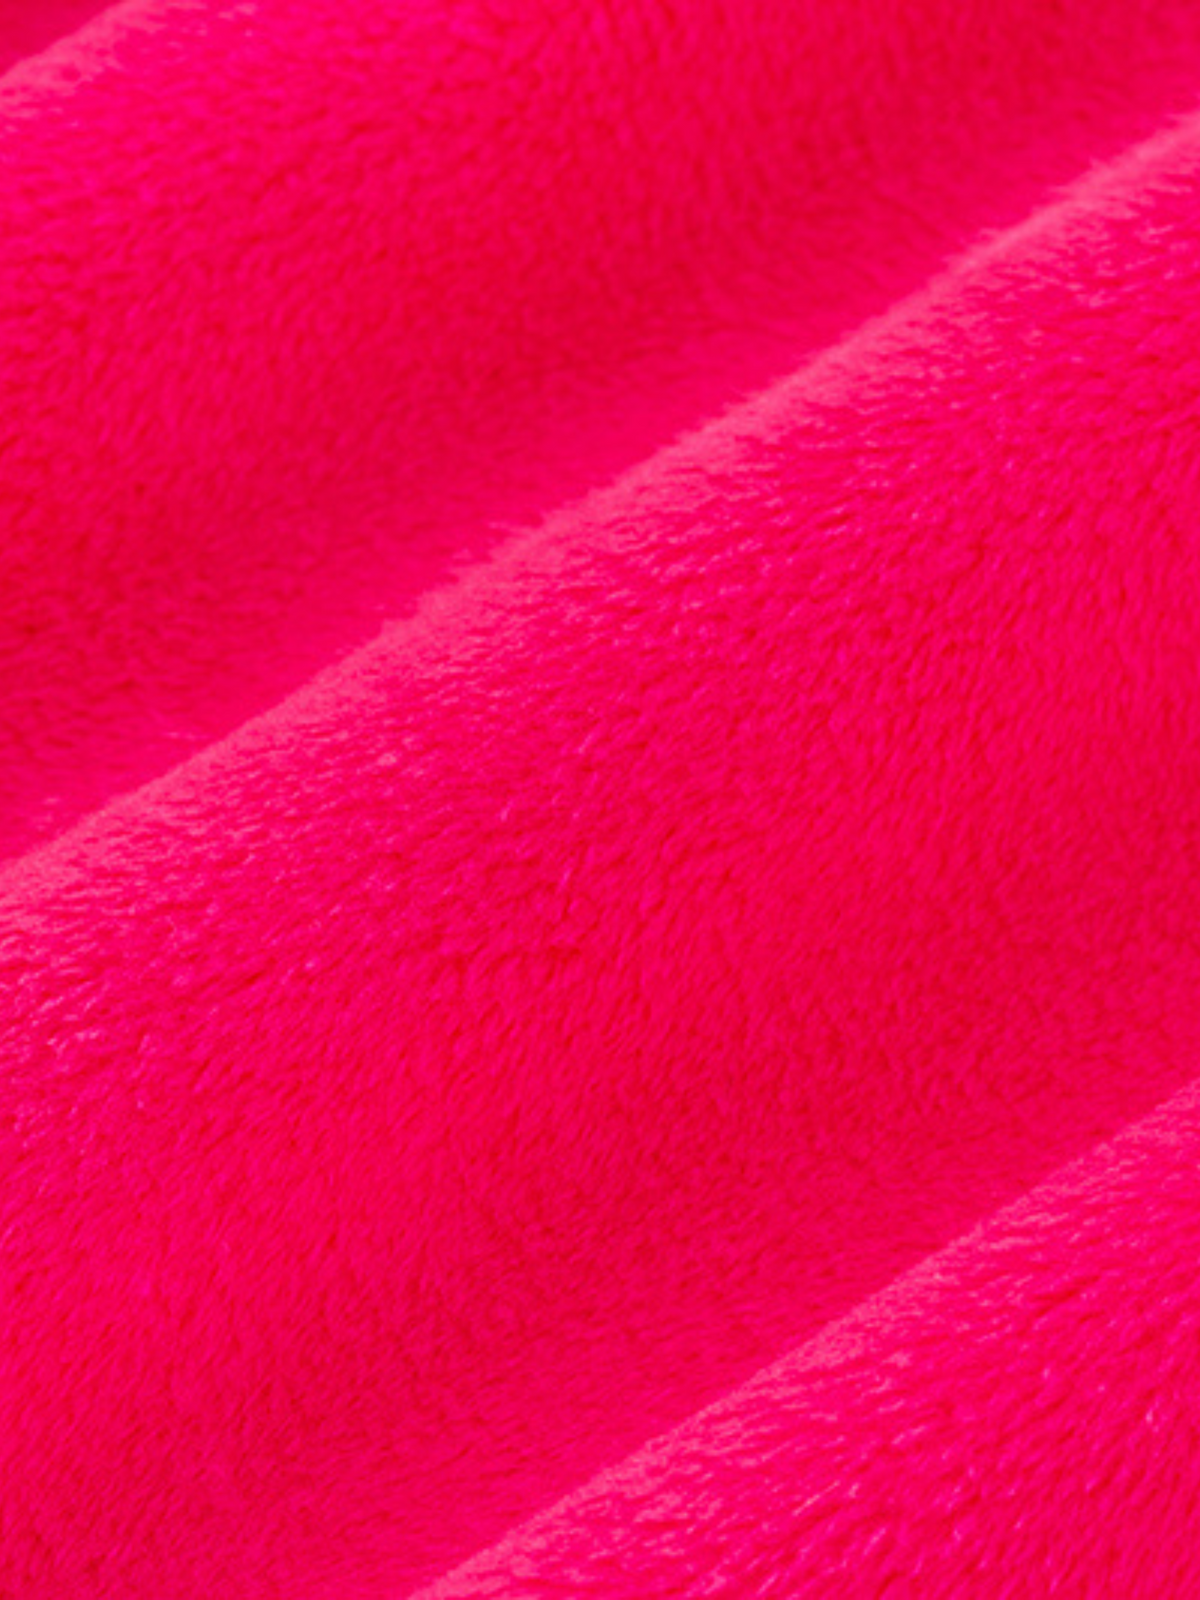 Fitted Sheet - Fuschia Minky Sheet : All Sizes - DBC Baby Bedding Co 